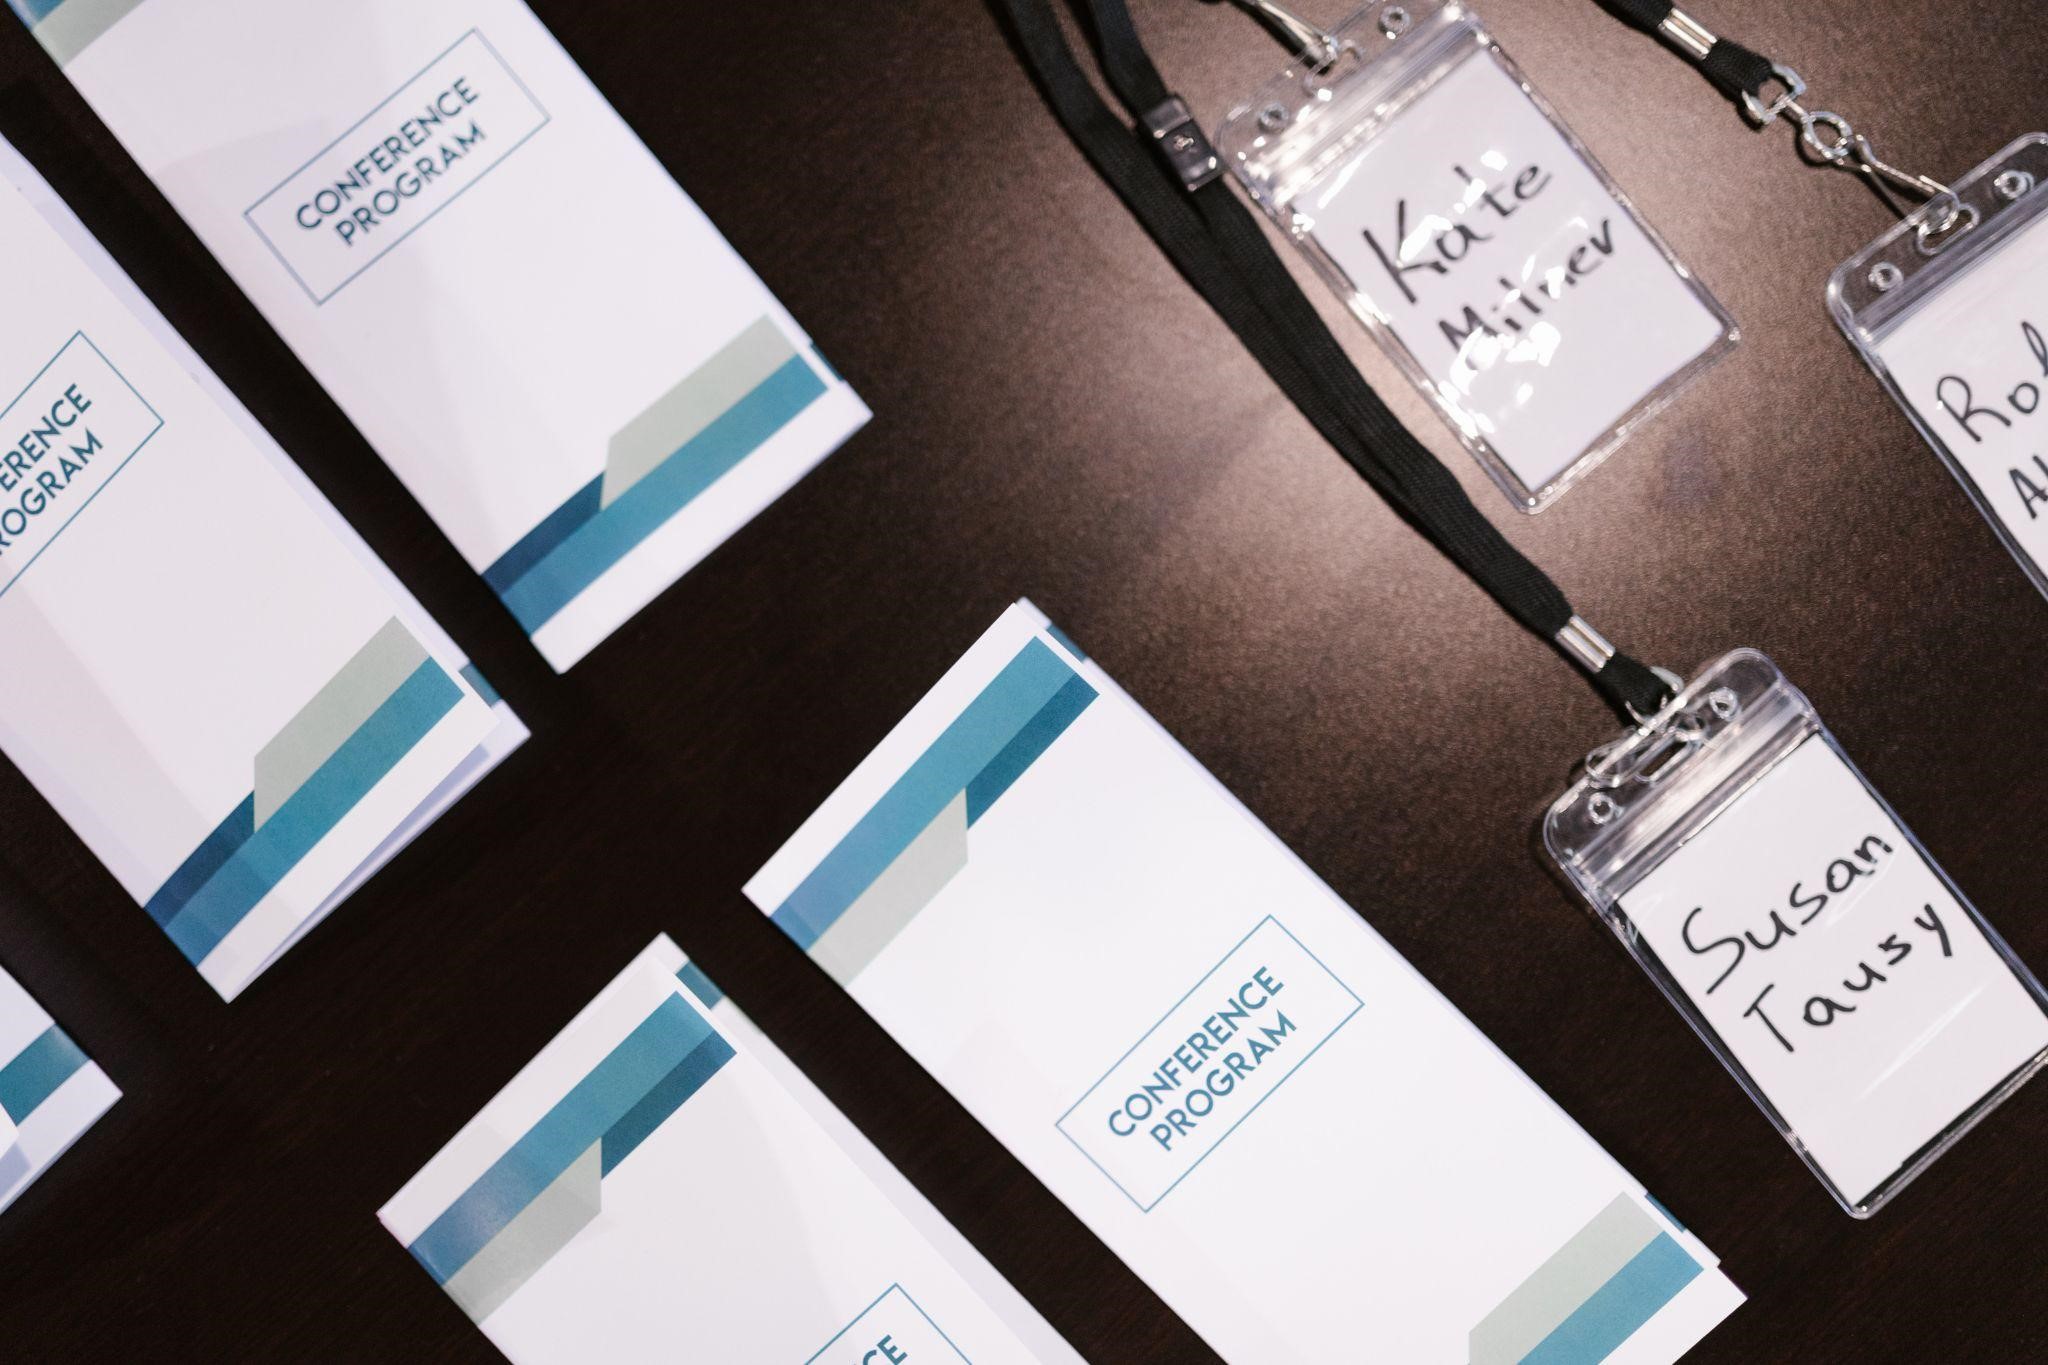 name tags and brochures for a corporate event